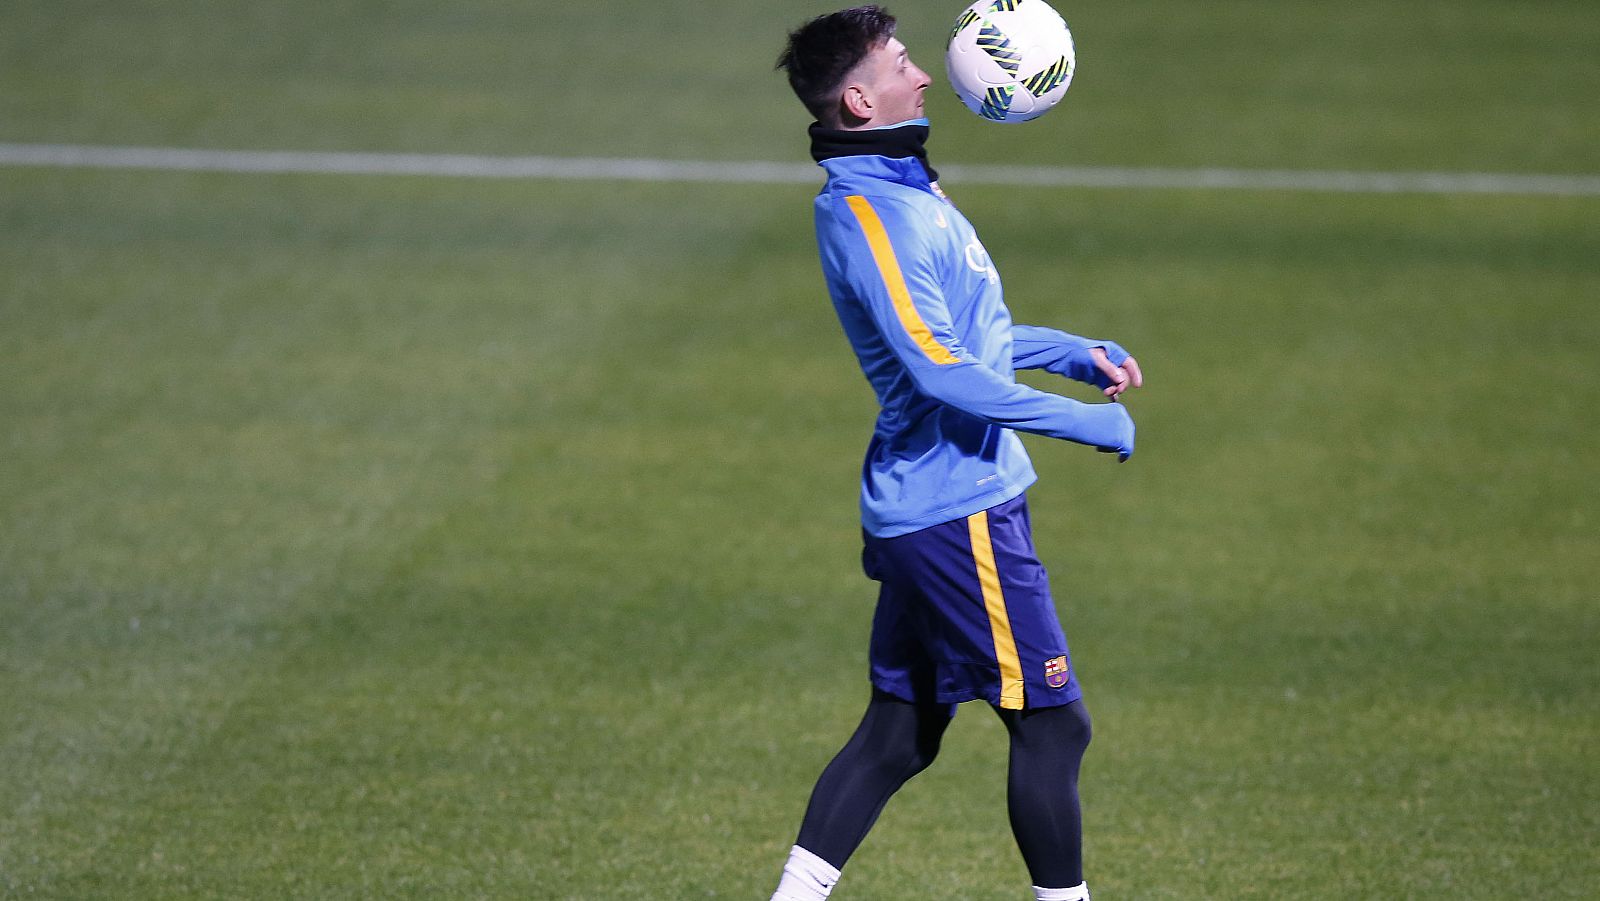 Barcelona's soccer player Messi controls the ball during a training session ahead of their Club World Cup semi-final soccer match against Guangzhou Evergrande in Yokohama